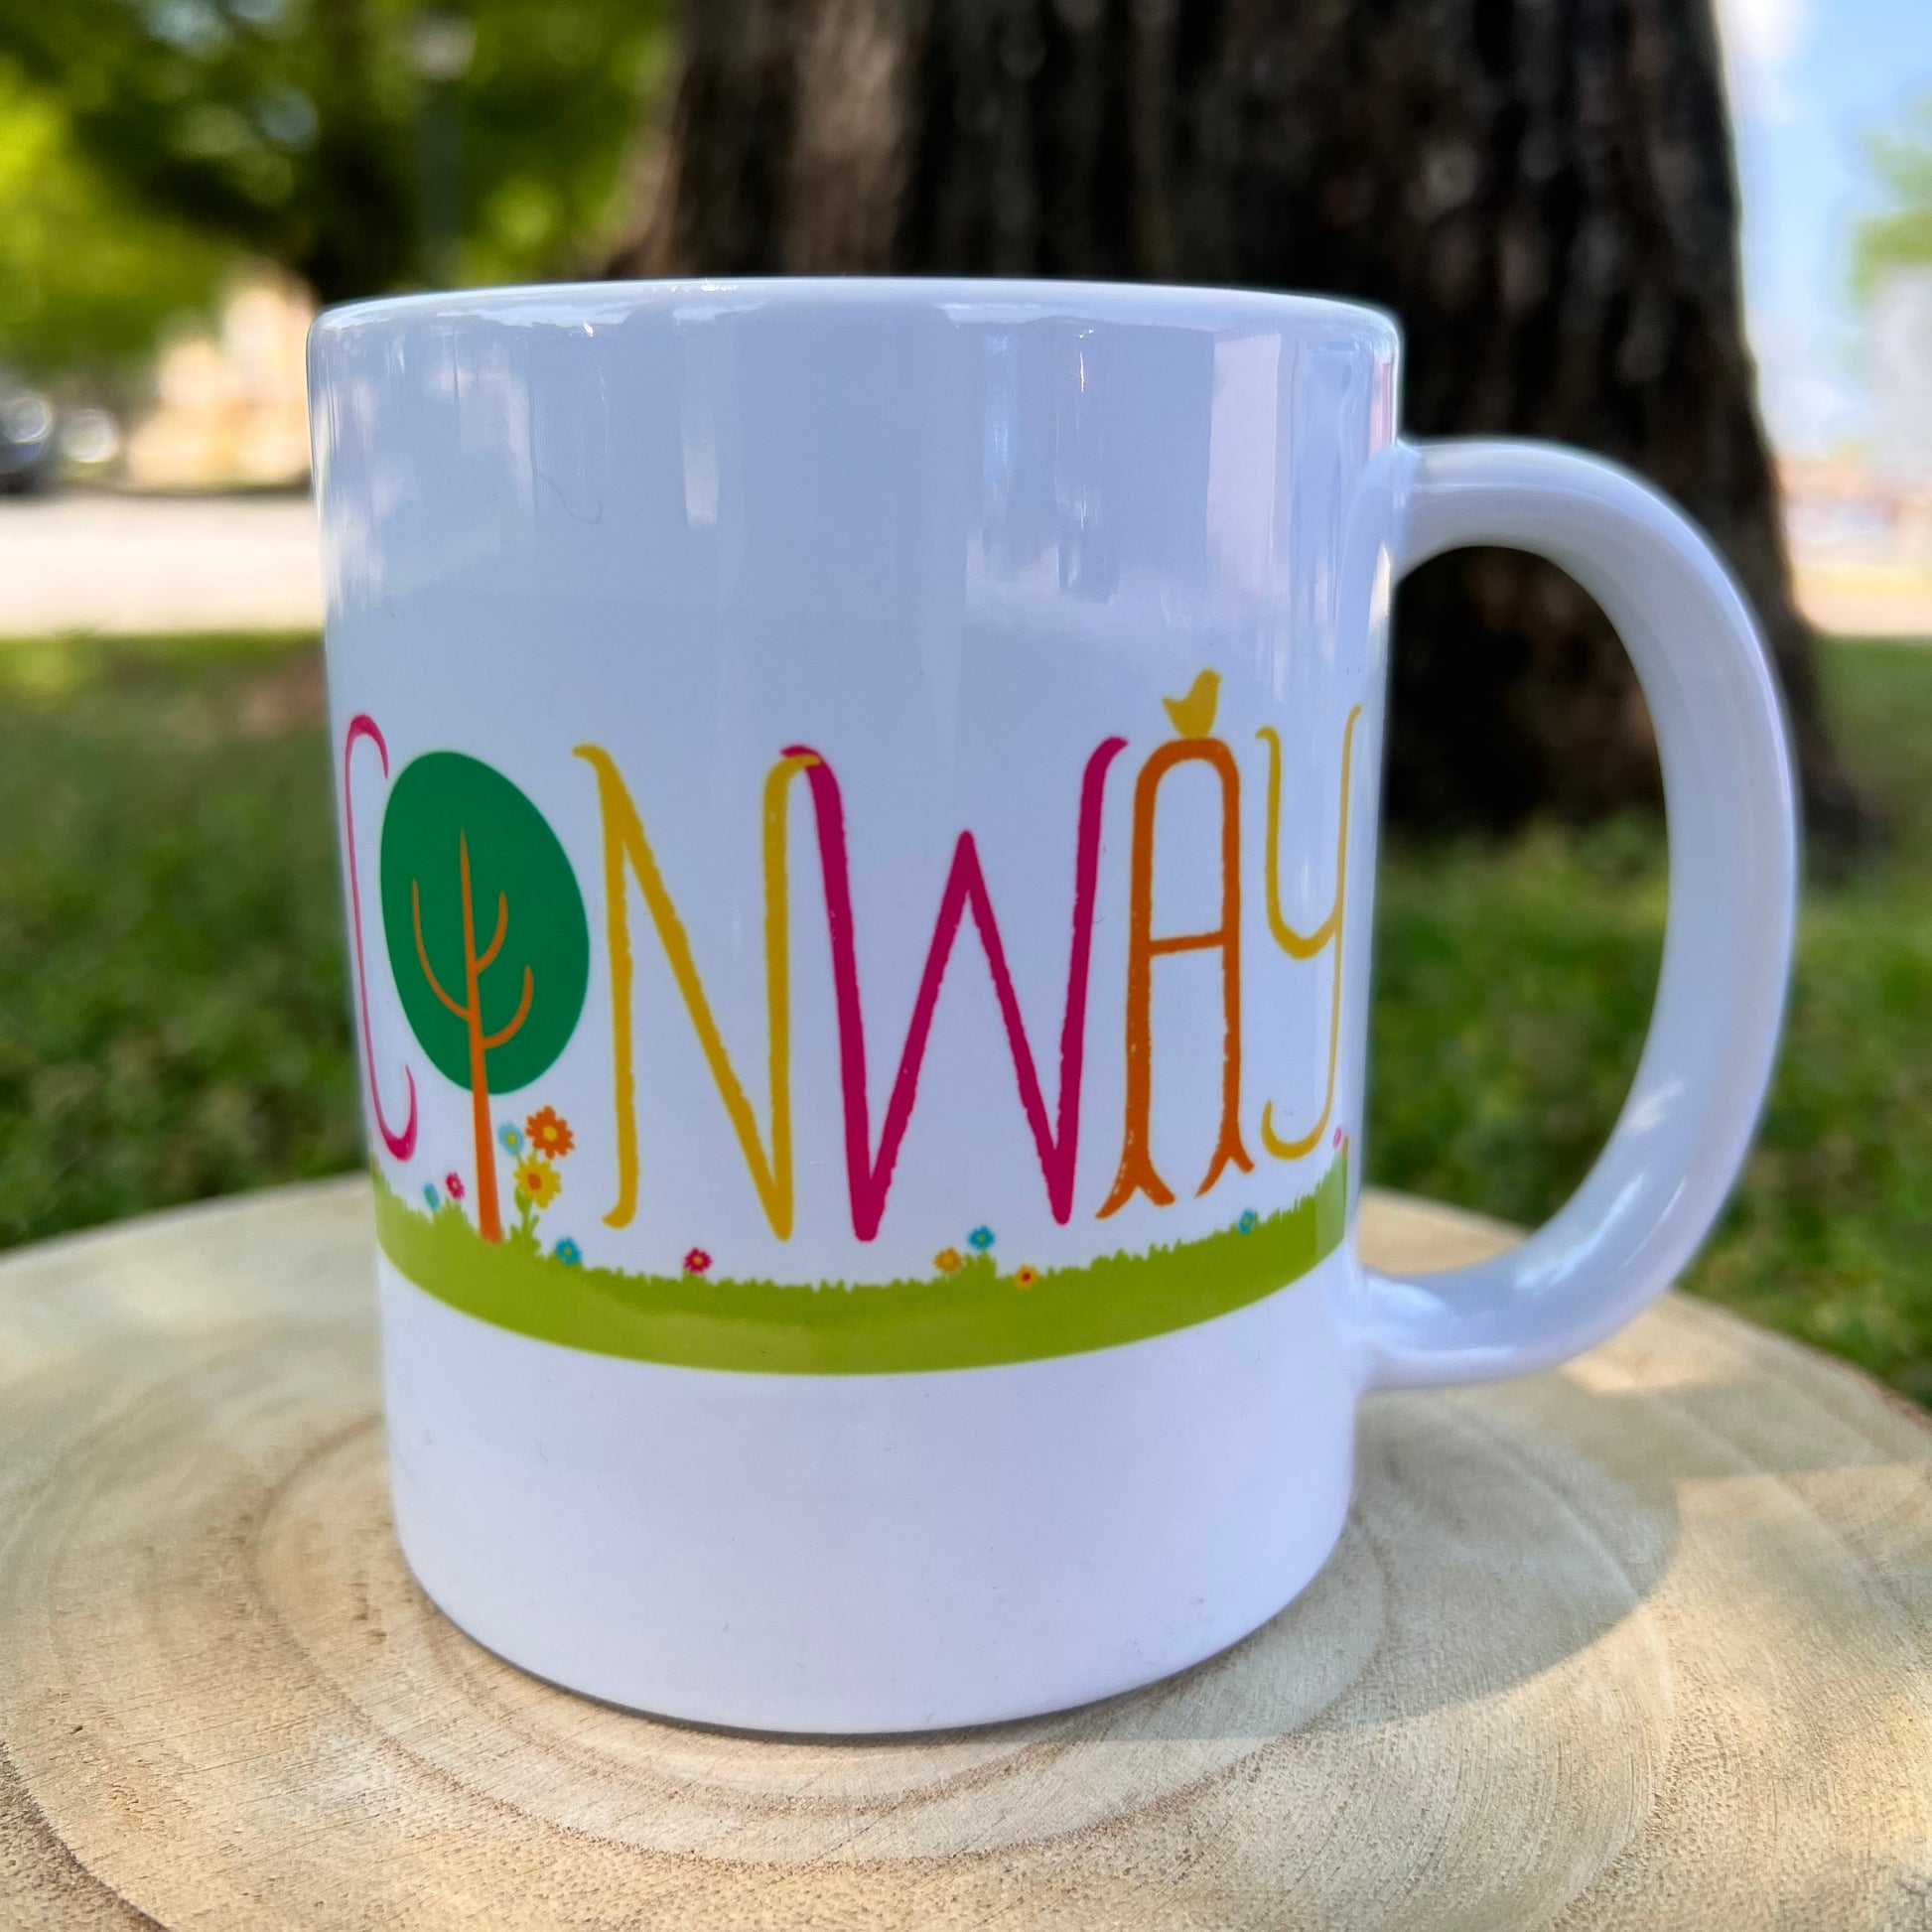 white ceramic mug with "conway" text surrounded with park greenery.